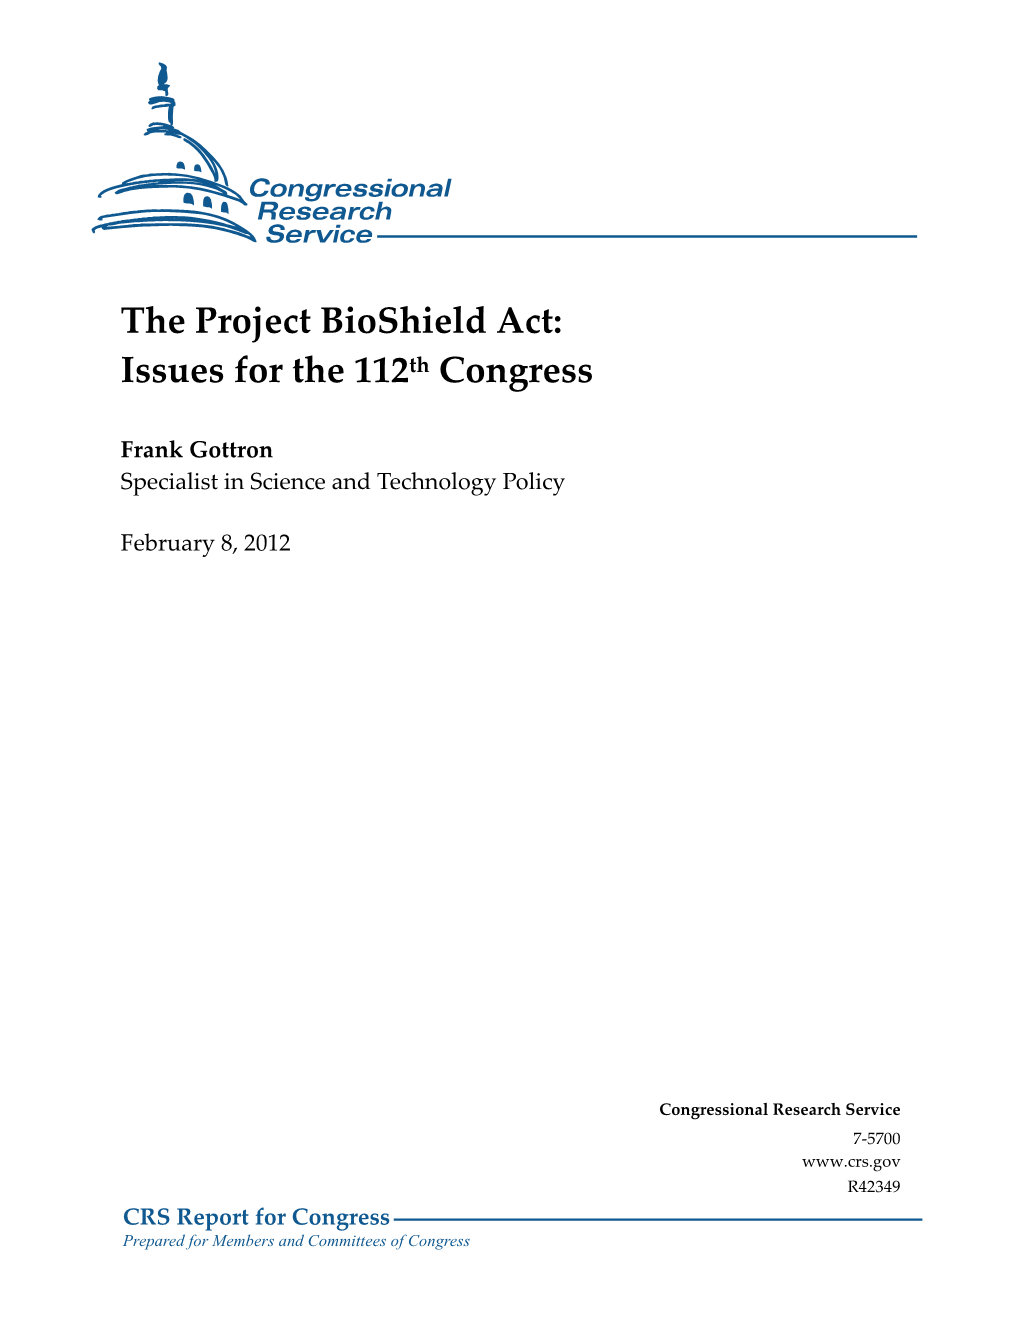 The Project Bioshield Act: Issues for the 112Th Congress